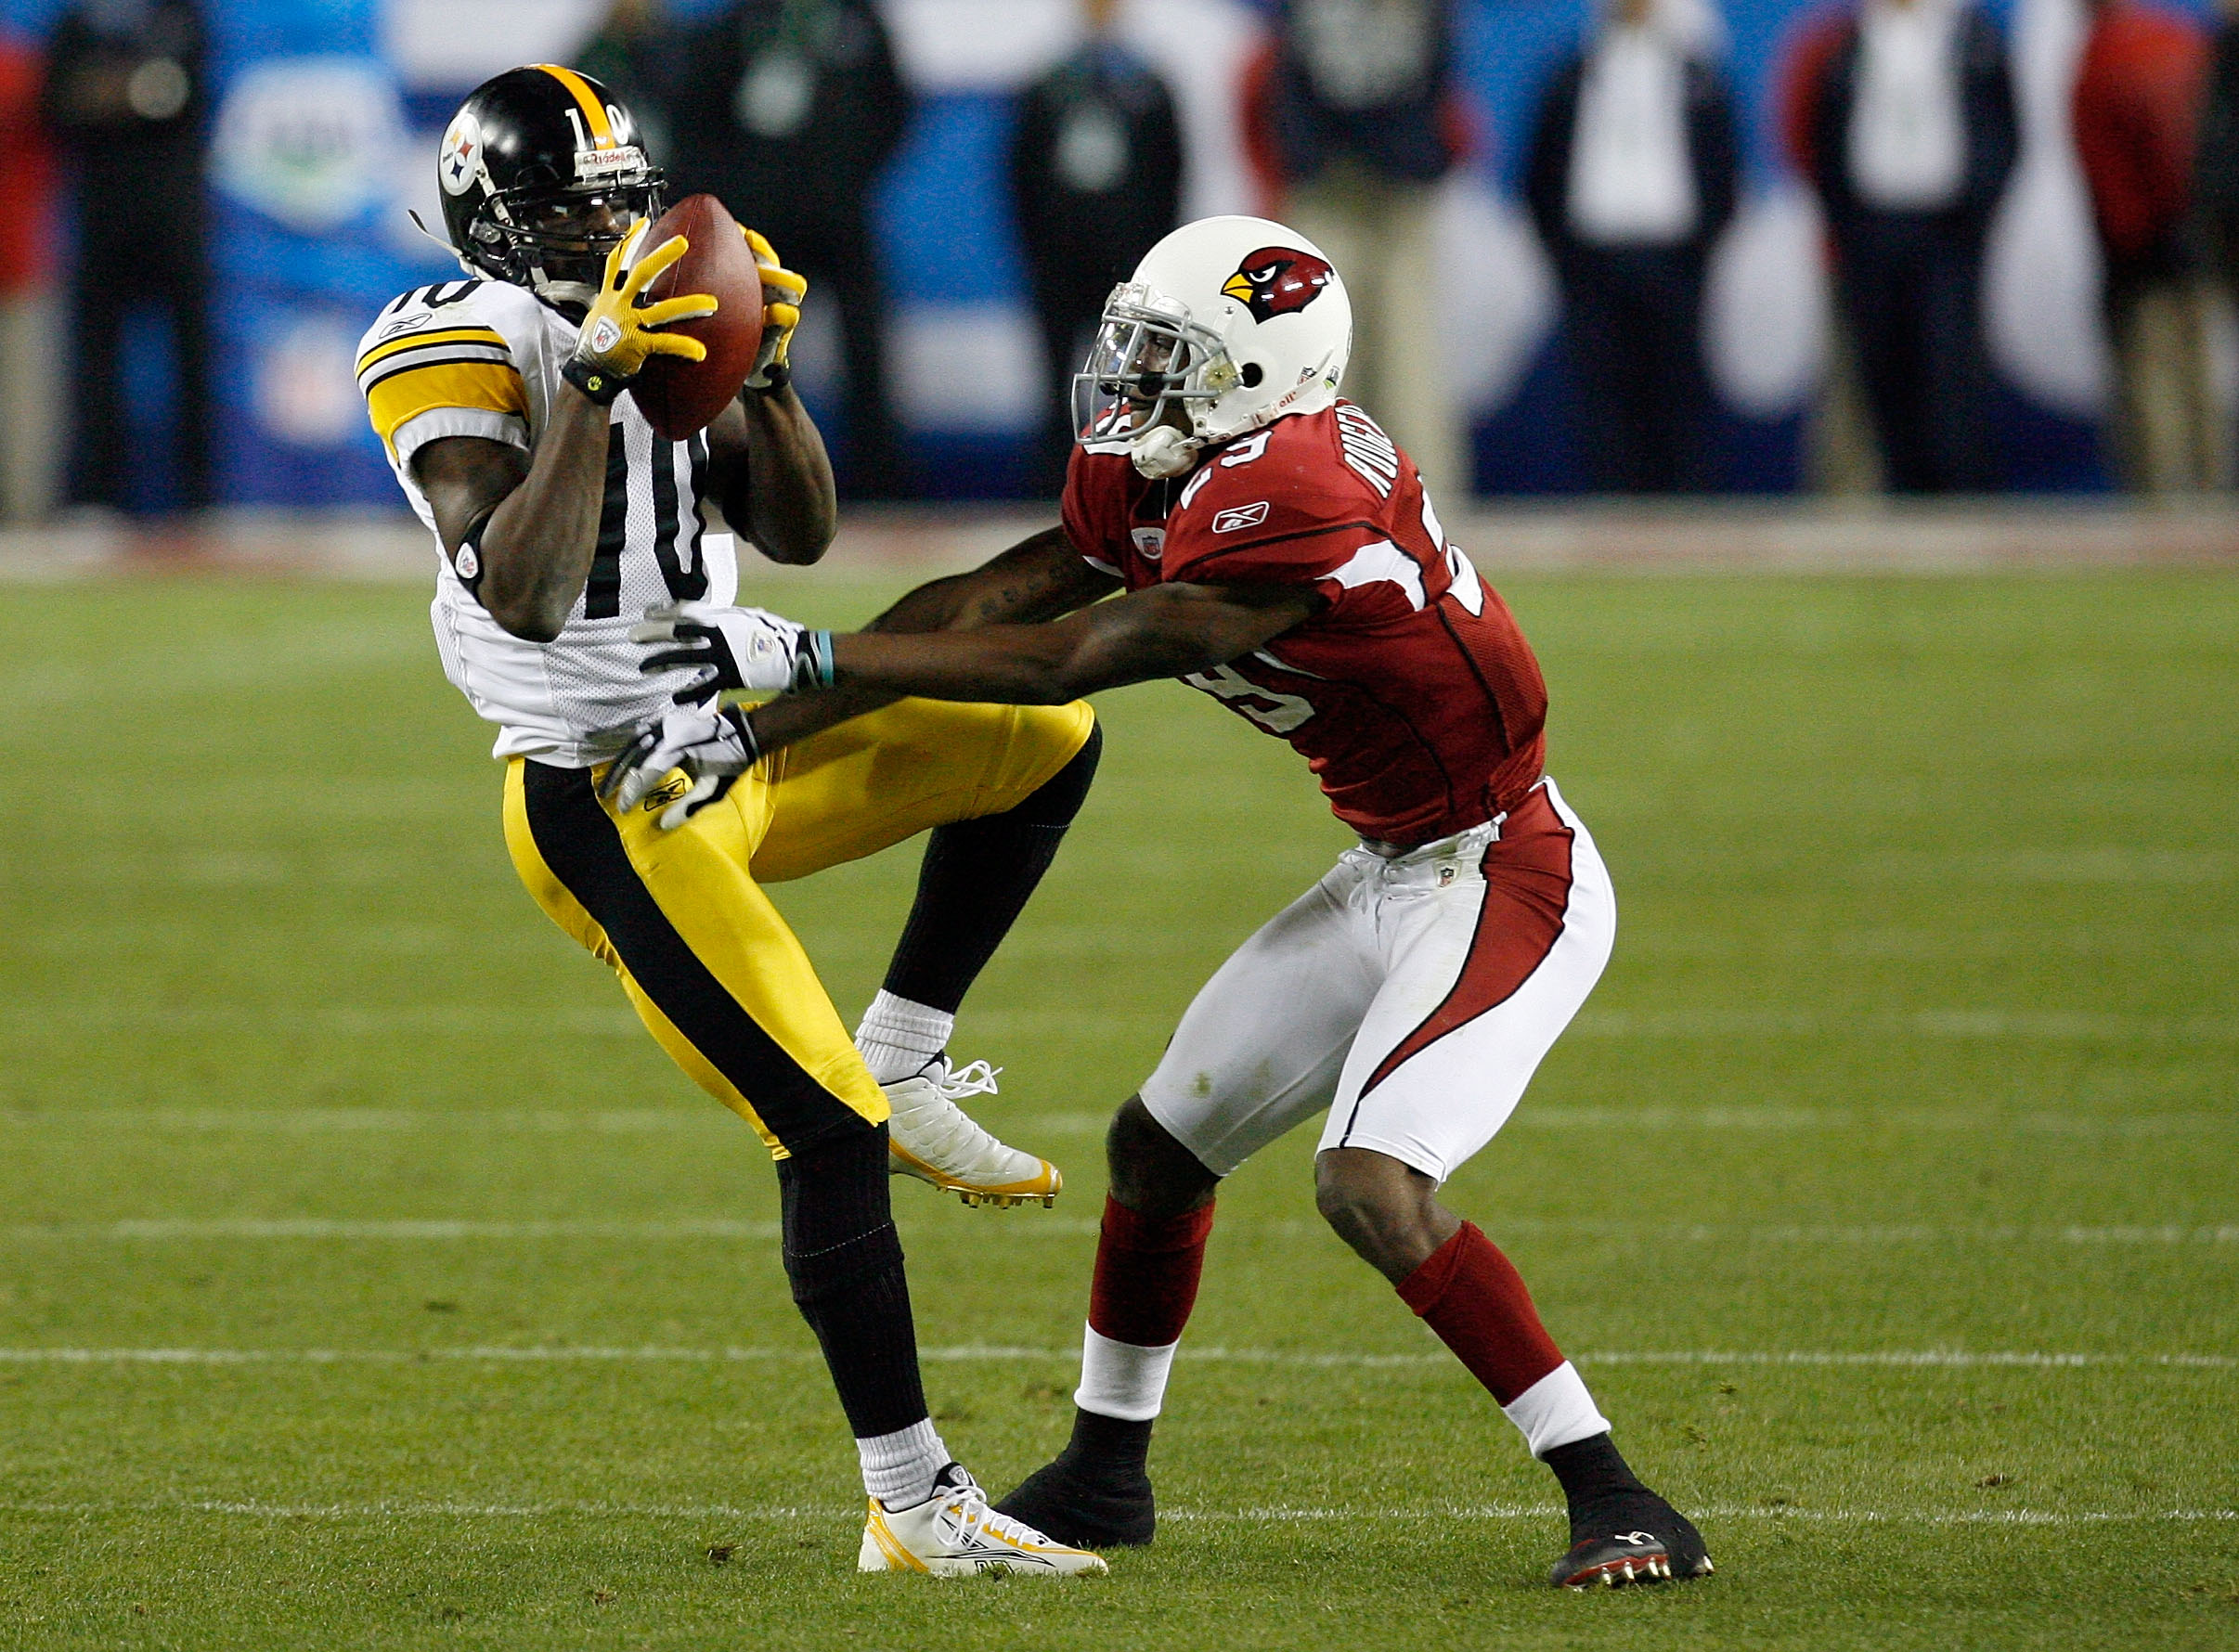 TAMPA, FL - FEBRUARY 01:  Santonio Holmes #10 of the Pittsburgh Steelers makes a reception against  the Arizona Cardinals during Super Bowl XLIII on February 1, 2009 at Raymond James Stadium in Tampa, Florida.  (Photo by Kevin C. Cox/Getty Images)